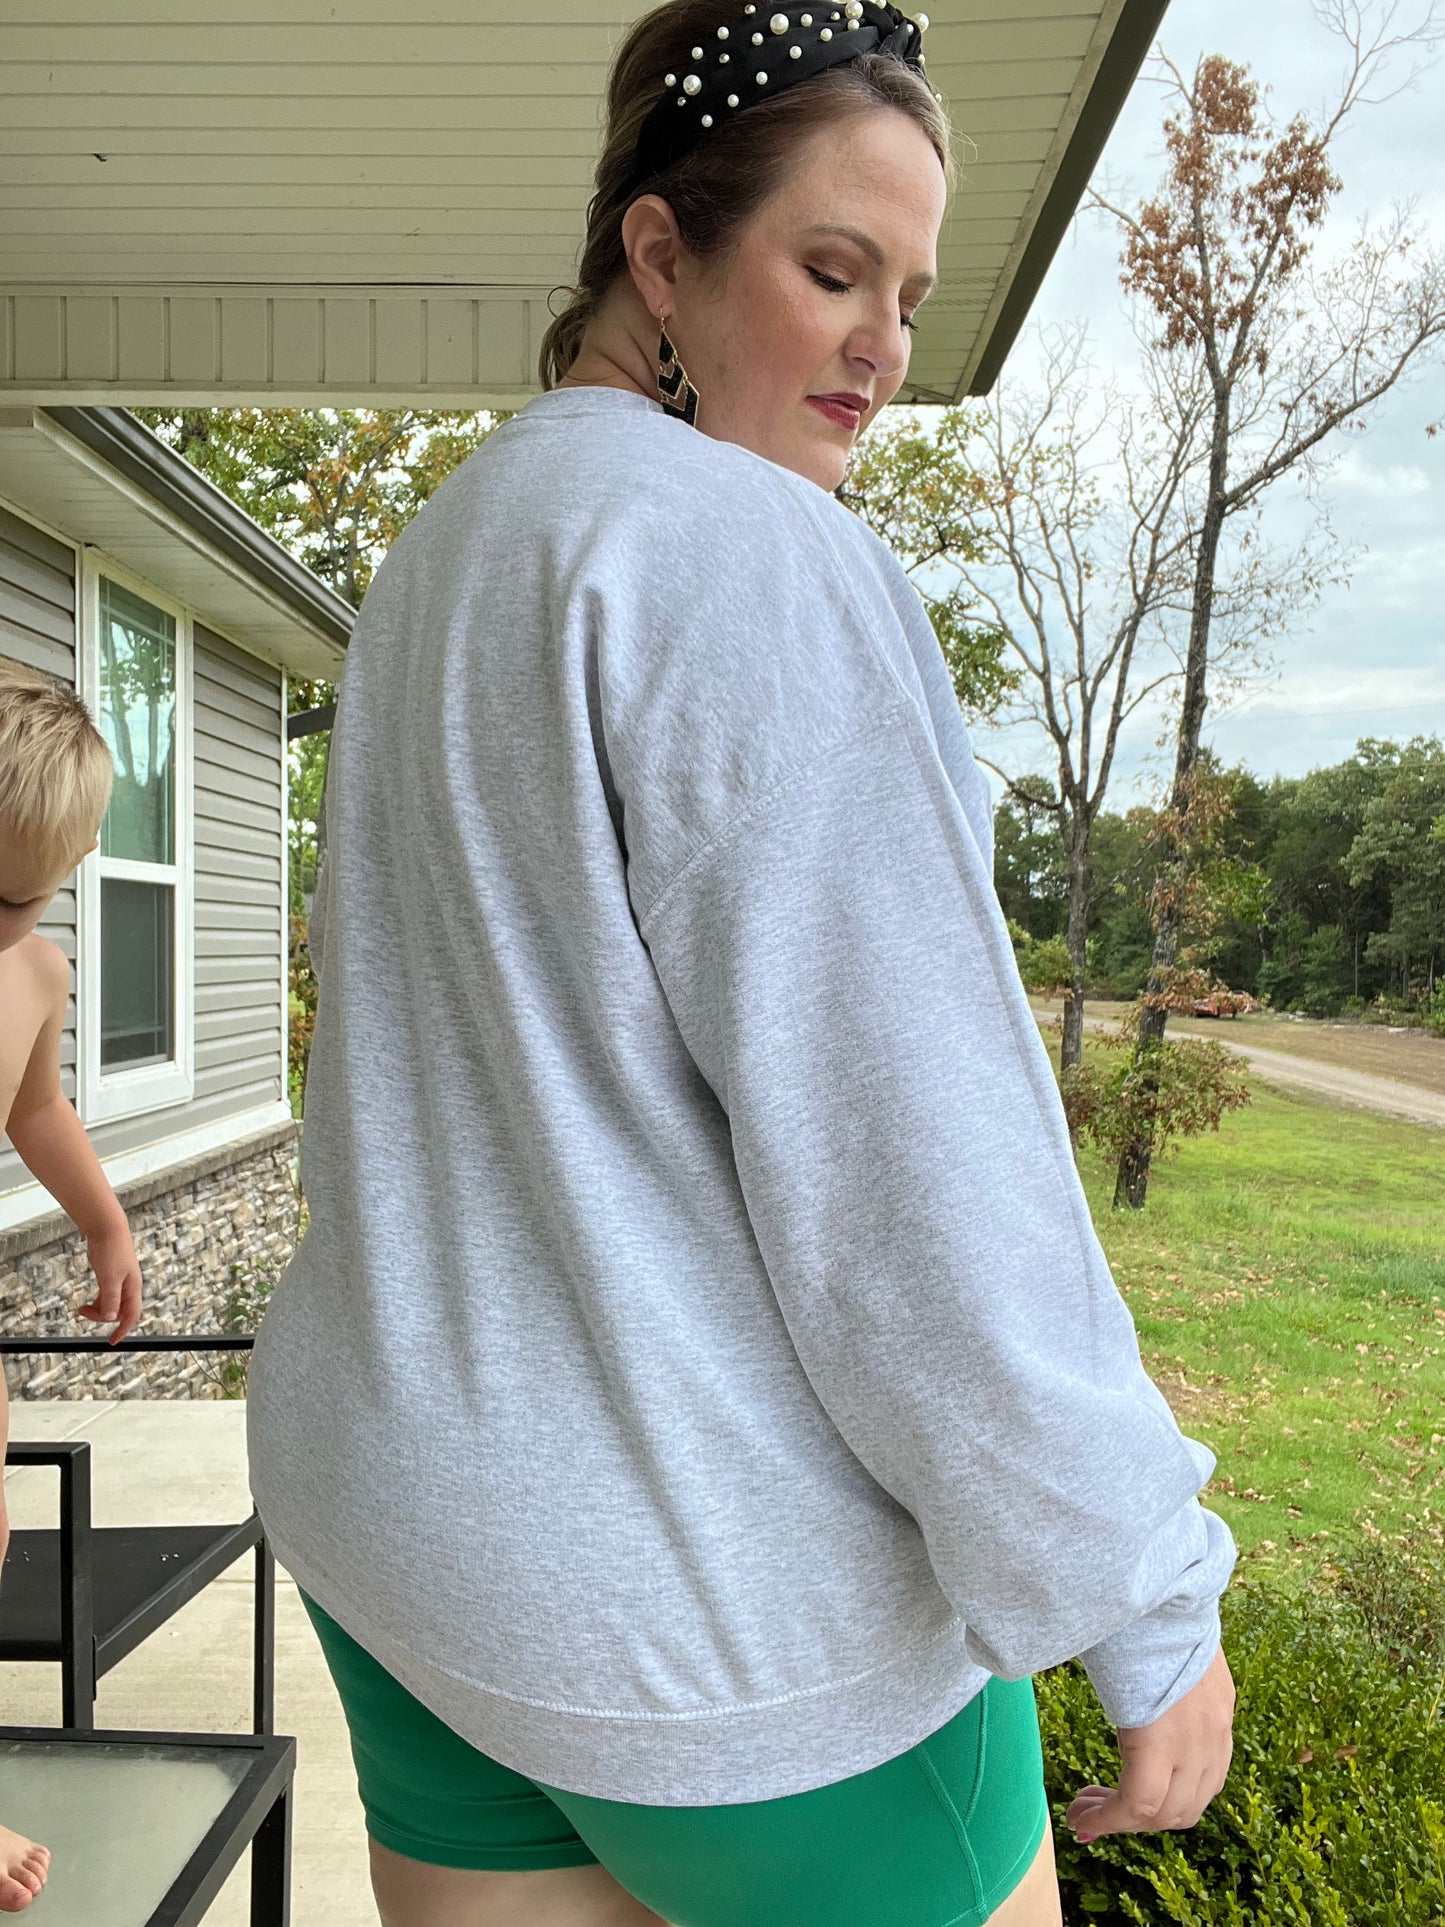 Mama Leopard Sweatshirt in Ash (with or without splatter)